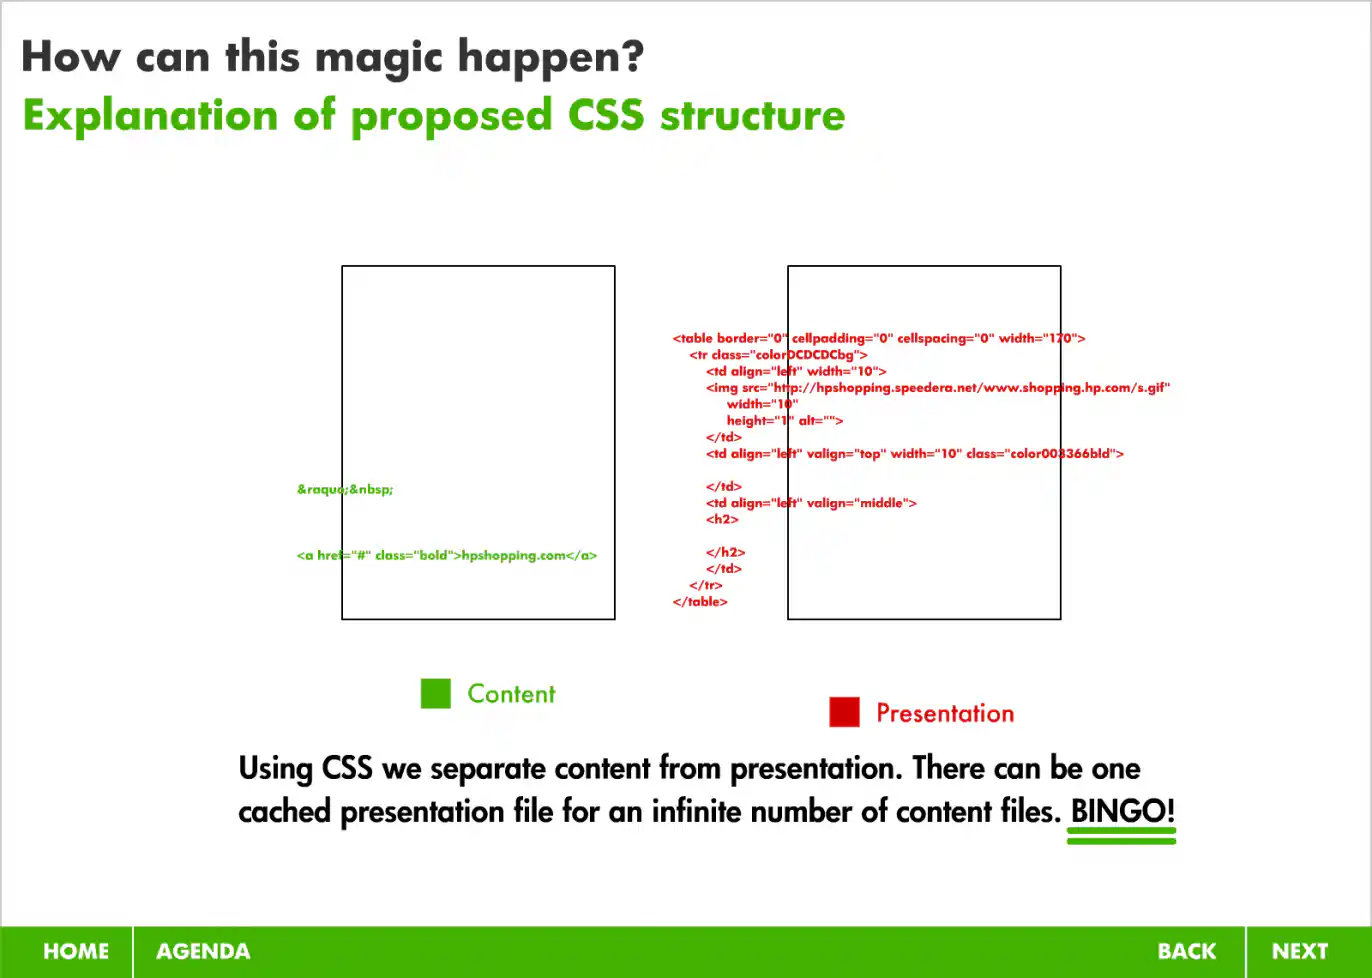 Slide 21: Explanation of Our Current HTML Structure Showing Seperation of Content and Presentation Code